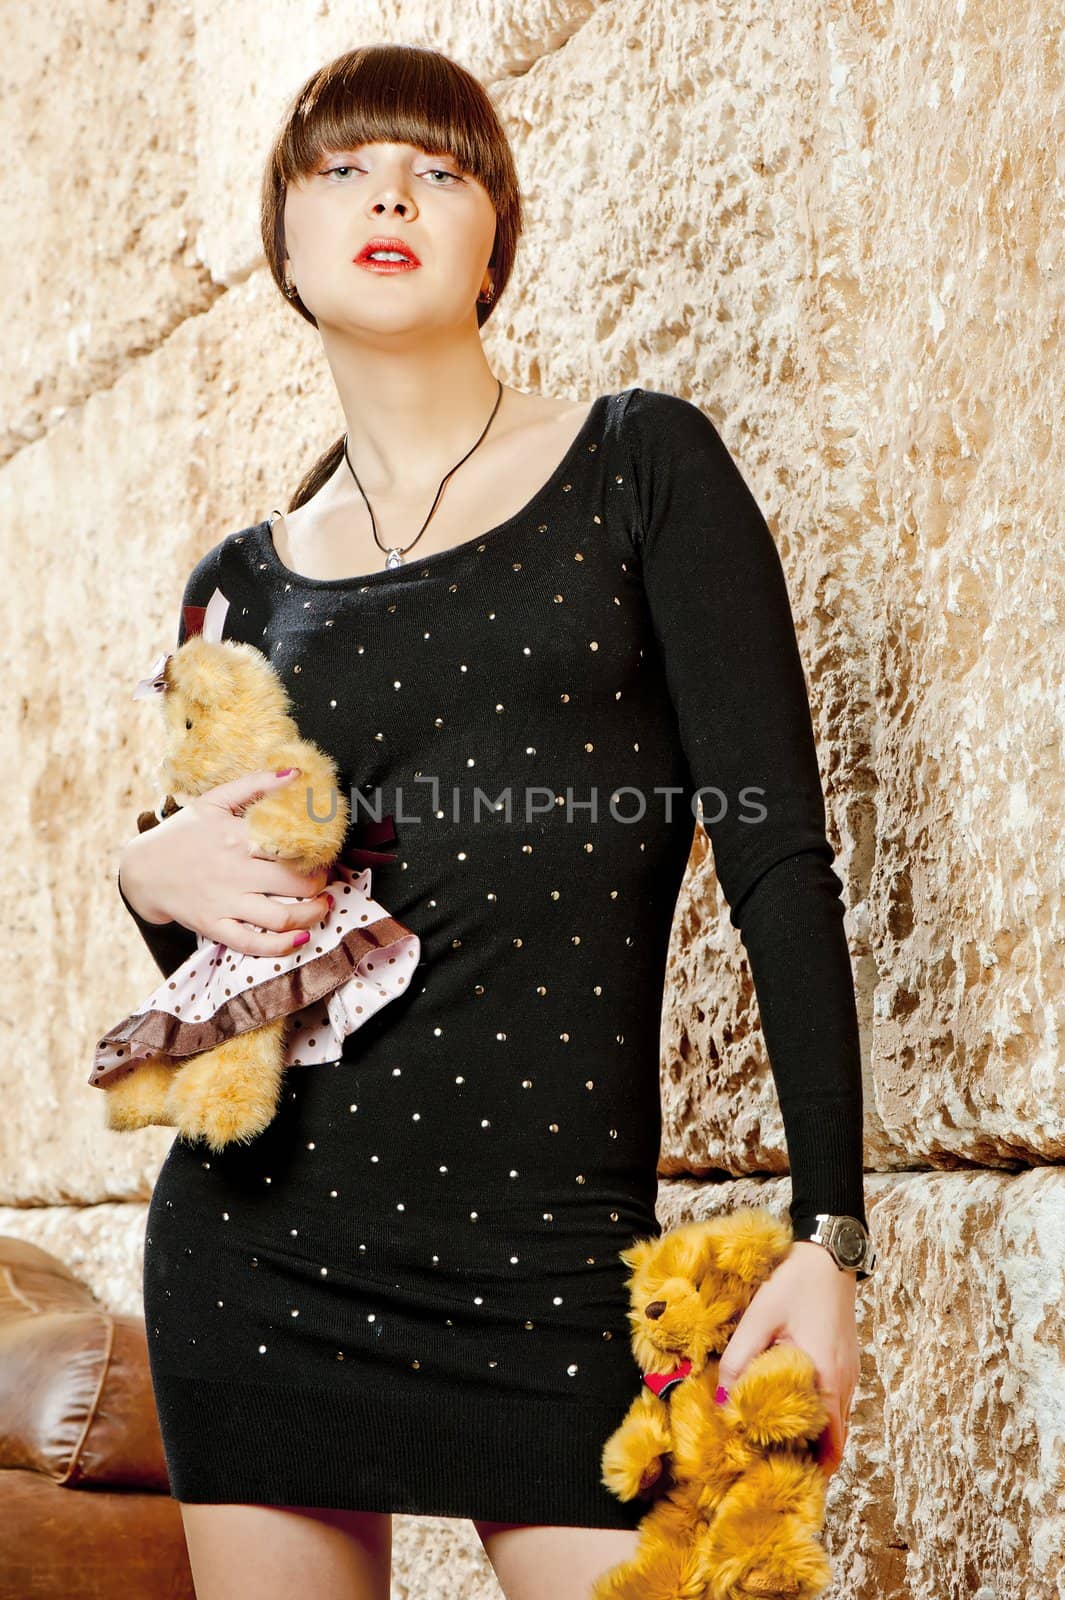 Girl with bangs in a black dress posing with teddy bears by kosmsos111